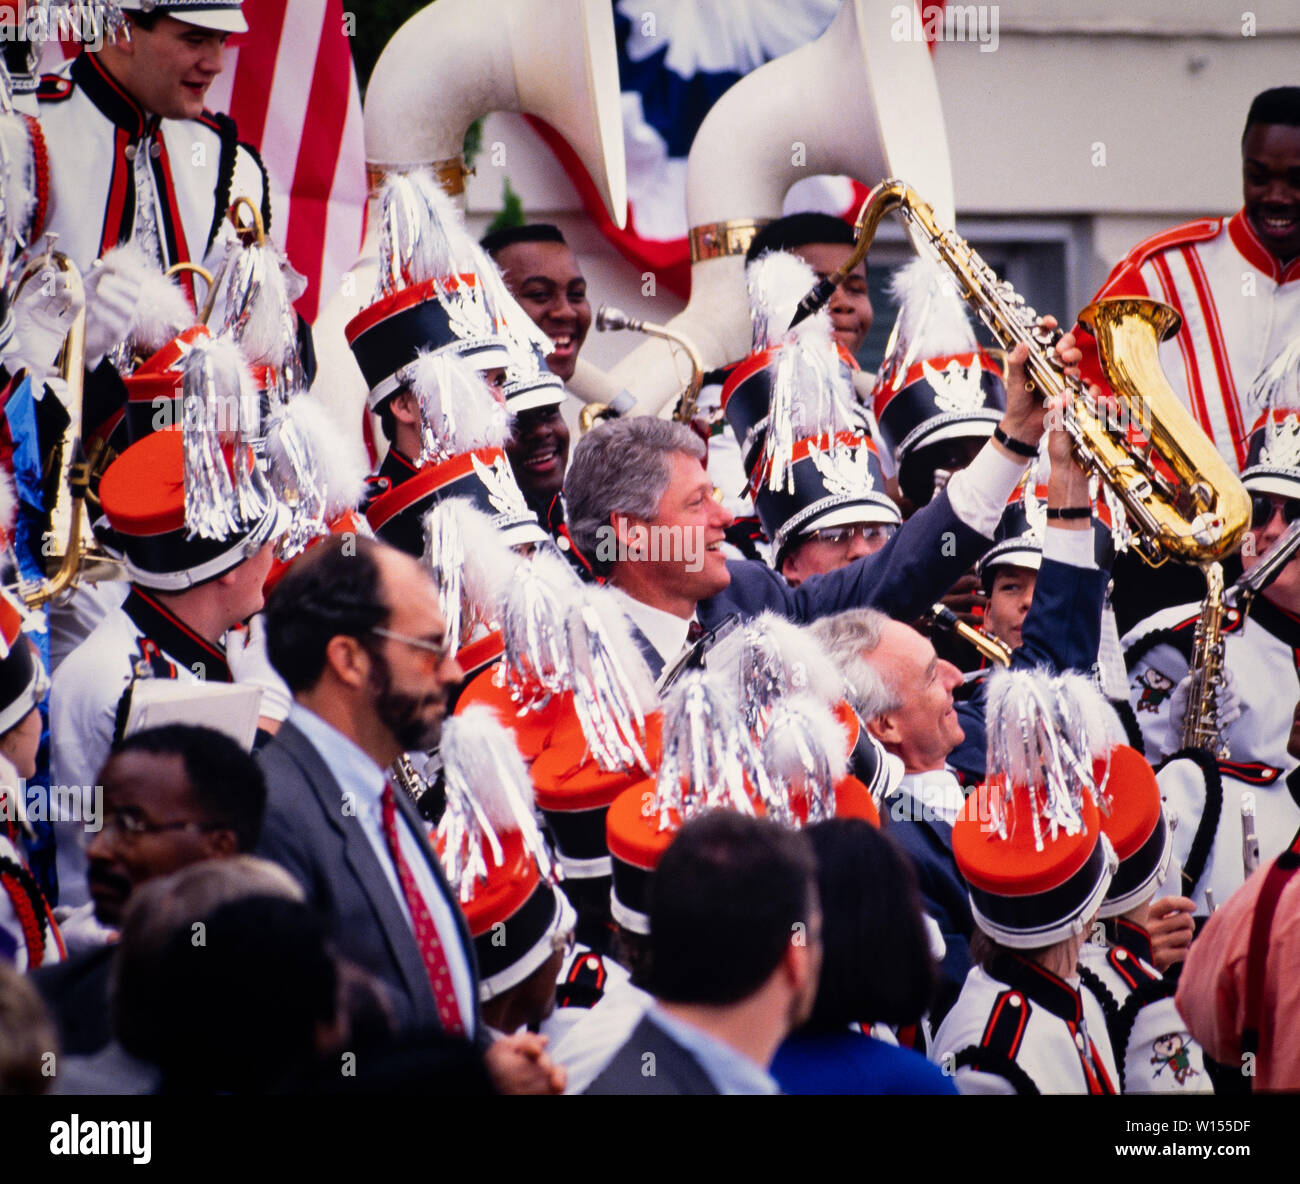 United States President Bill Clinton holds his saxophone aloft as he plays with a marching band in Macon, Georgia in 1993. Clinton is joined by US Senator Wyche Fowler of Georgia. Stock Photo